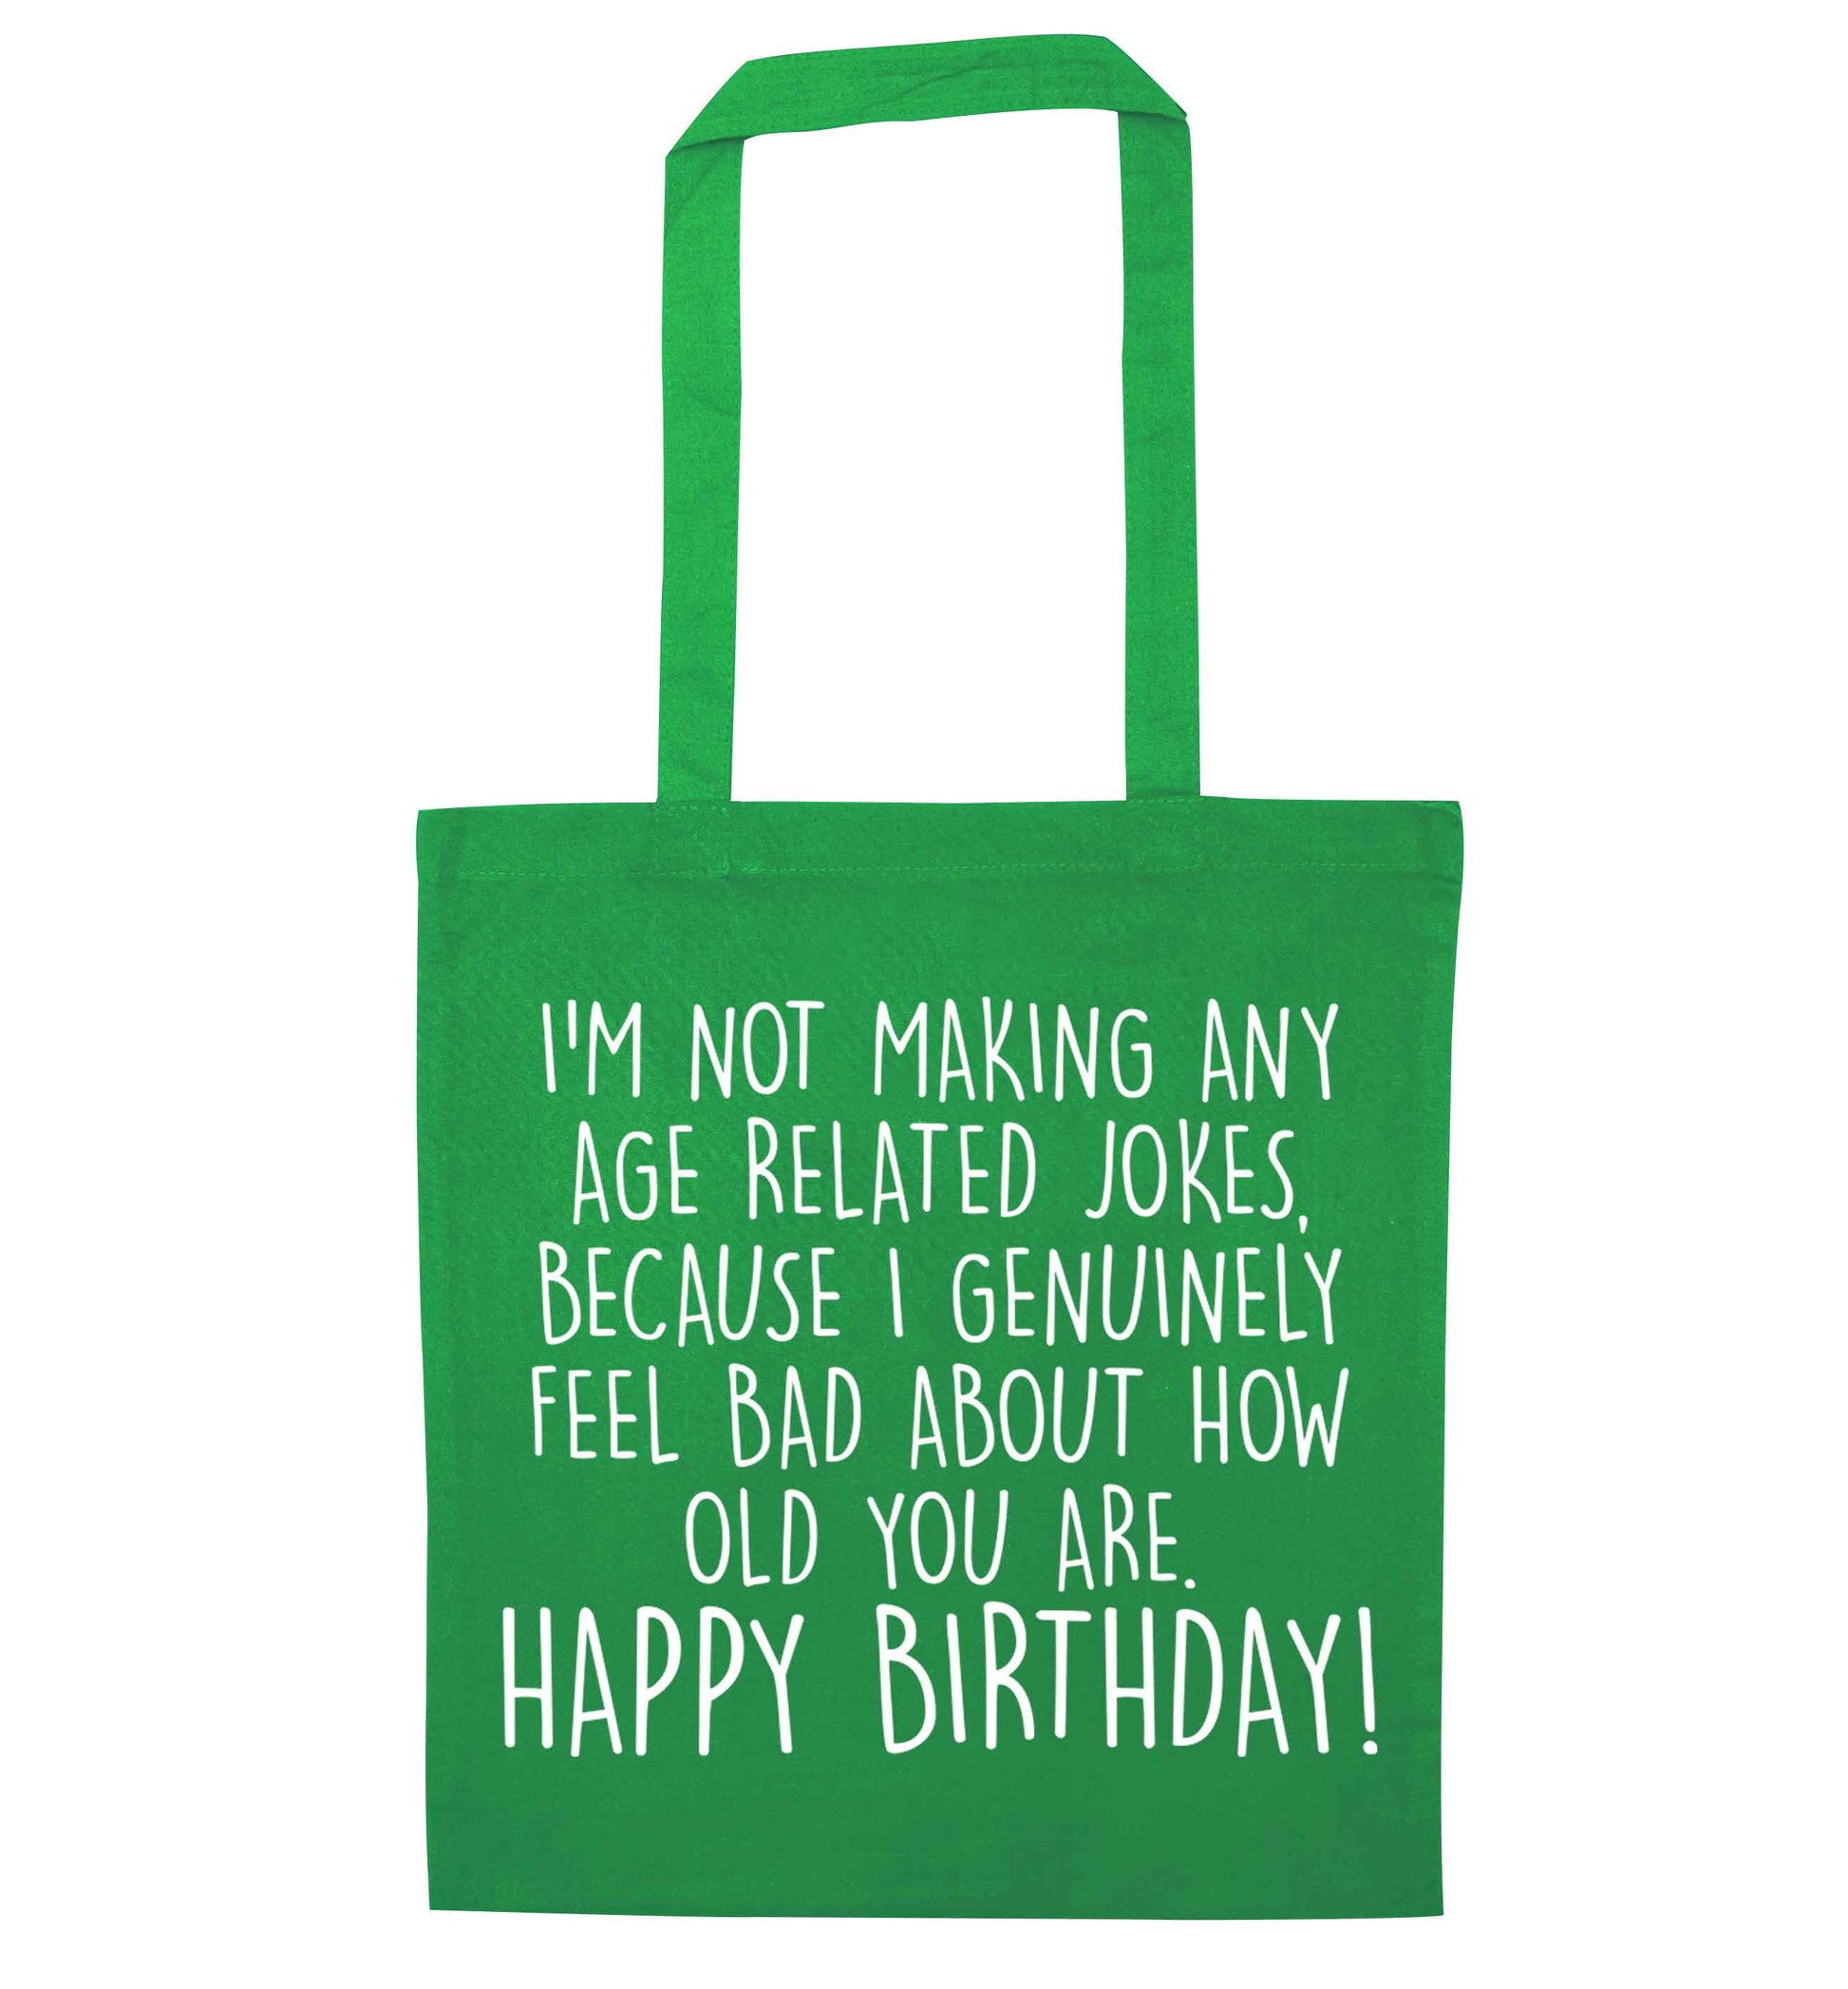 I'm not making any age related jokes because I genuinely feel bad for how old you are green tote bag